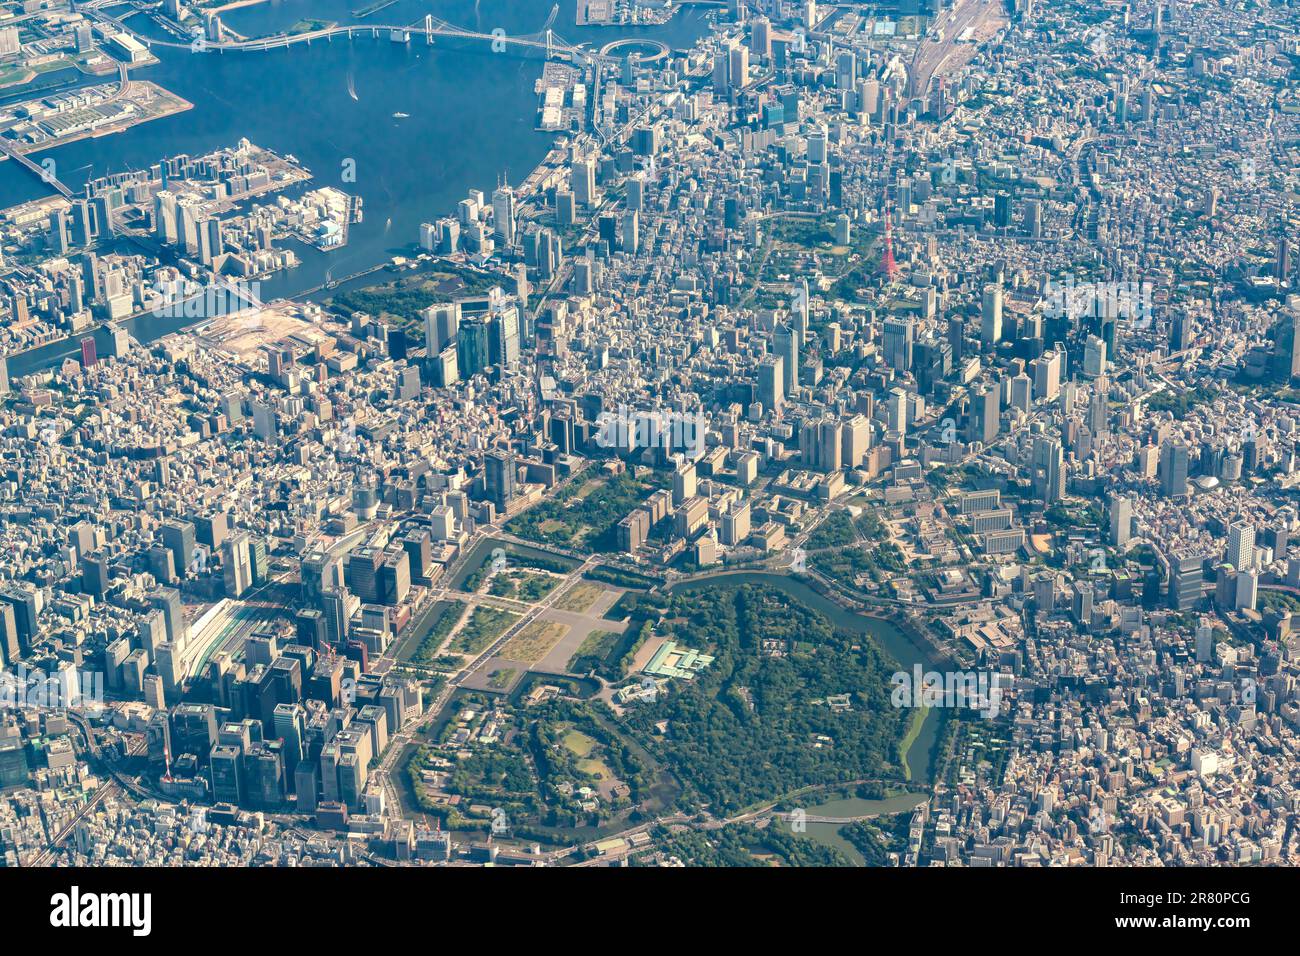 View of Tokyo city and Emperor’spalace from an airplane Stock Photo